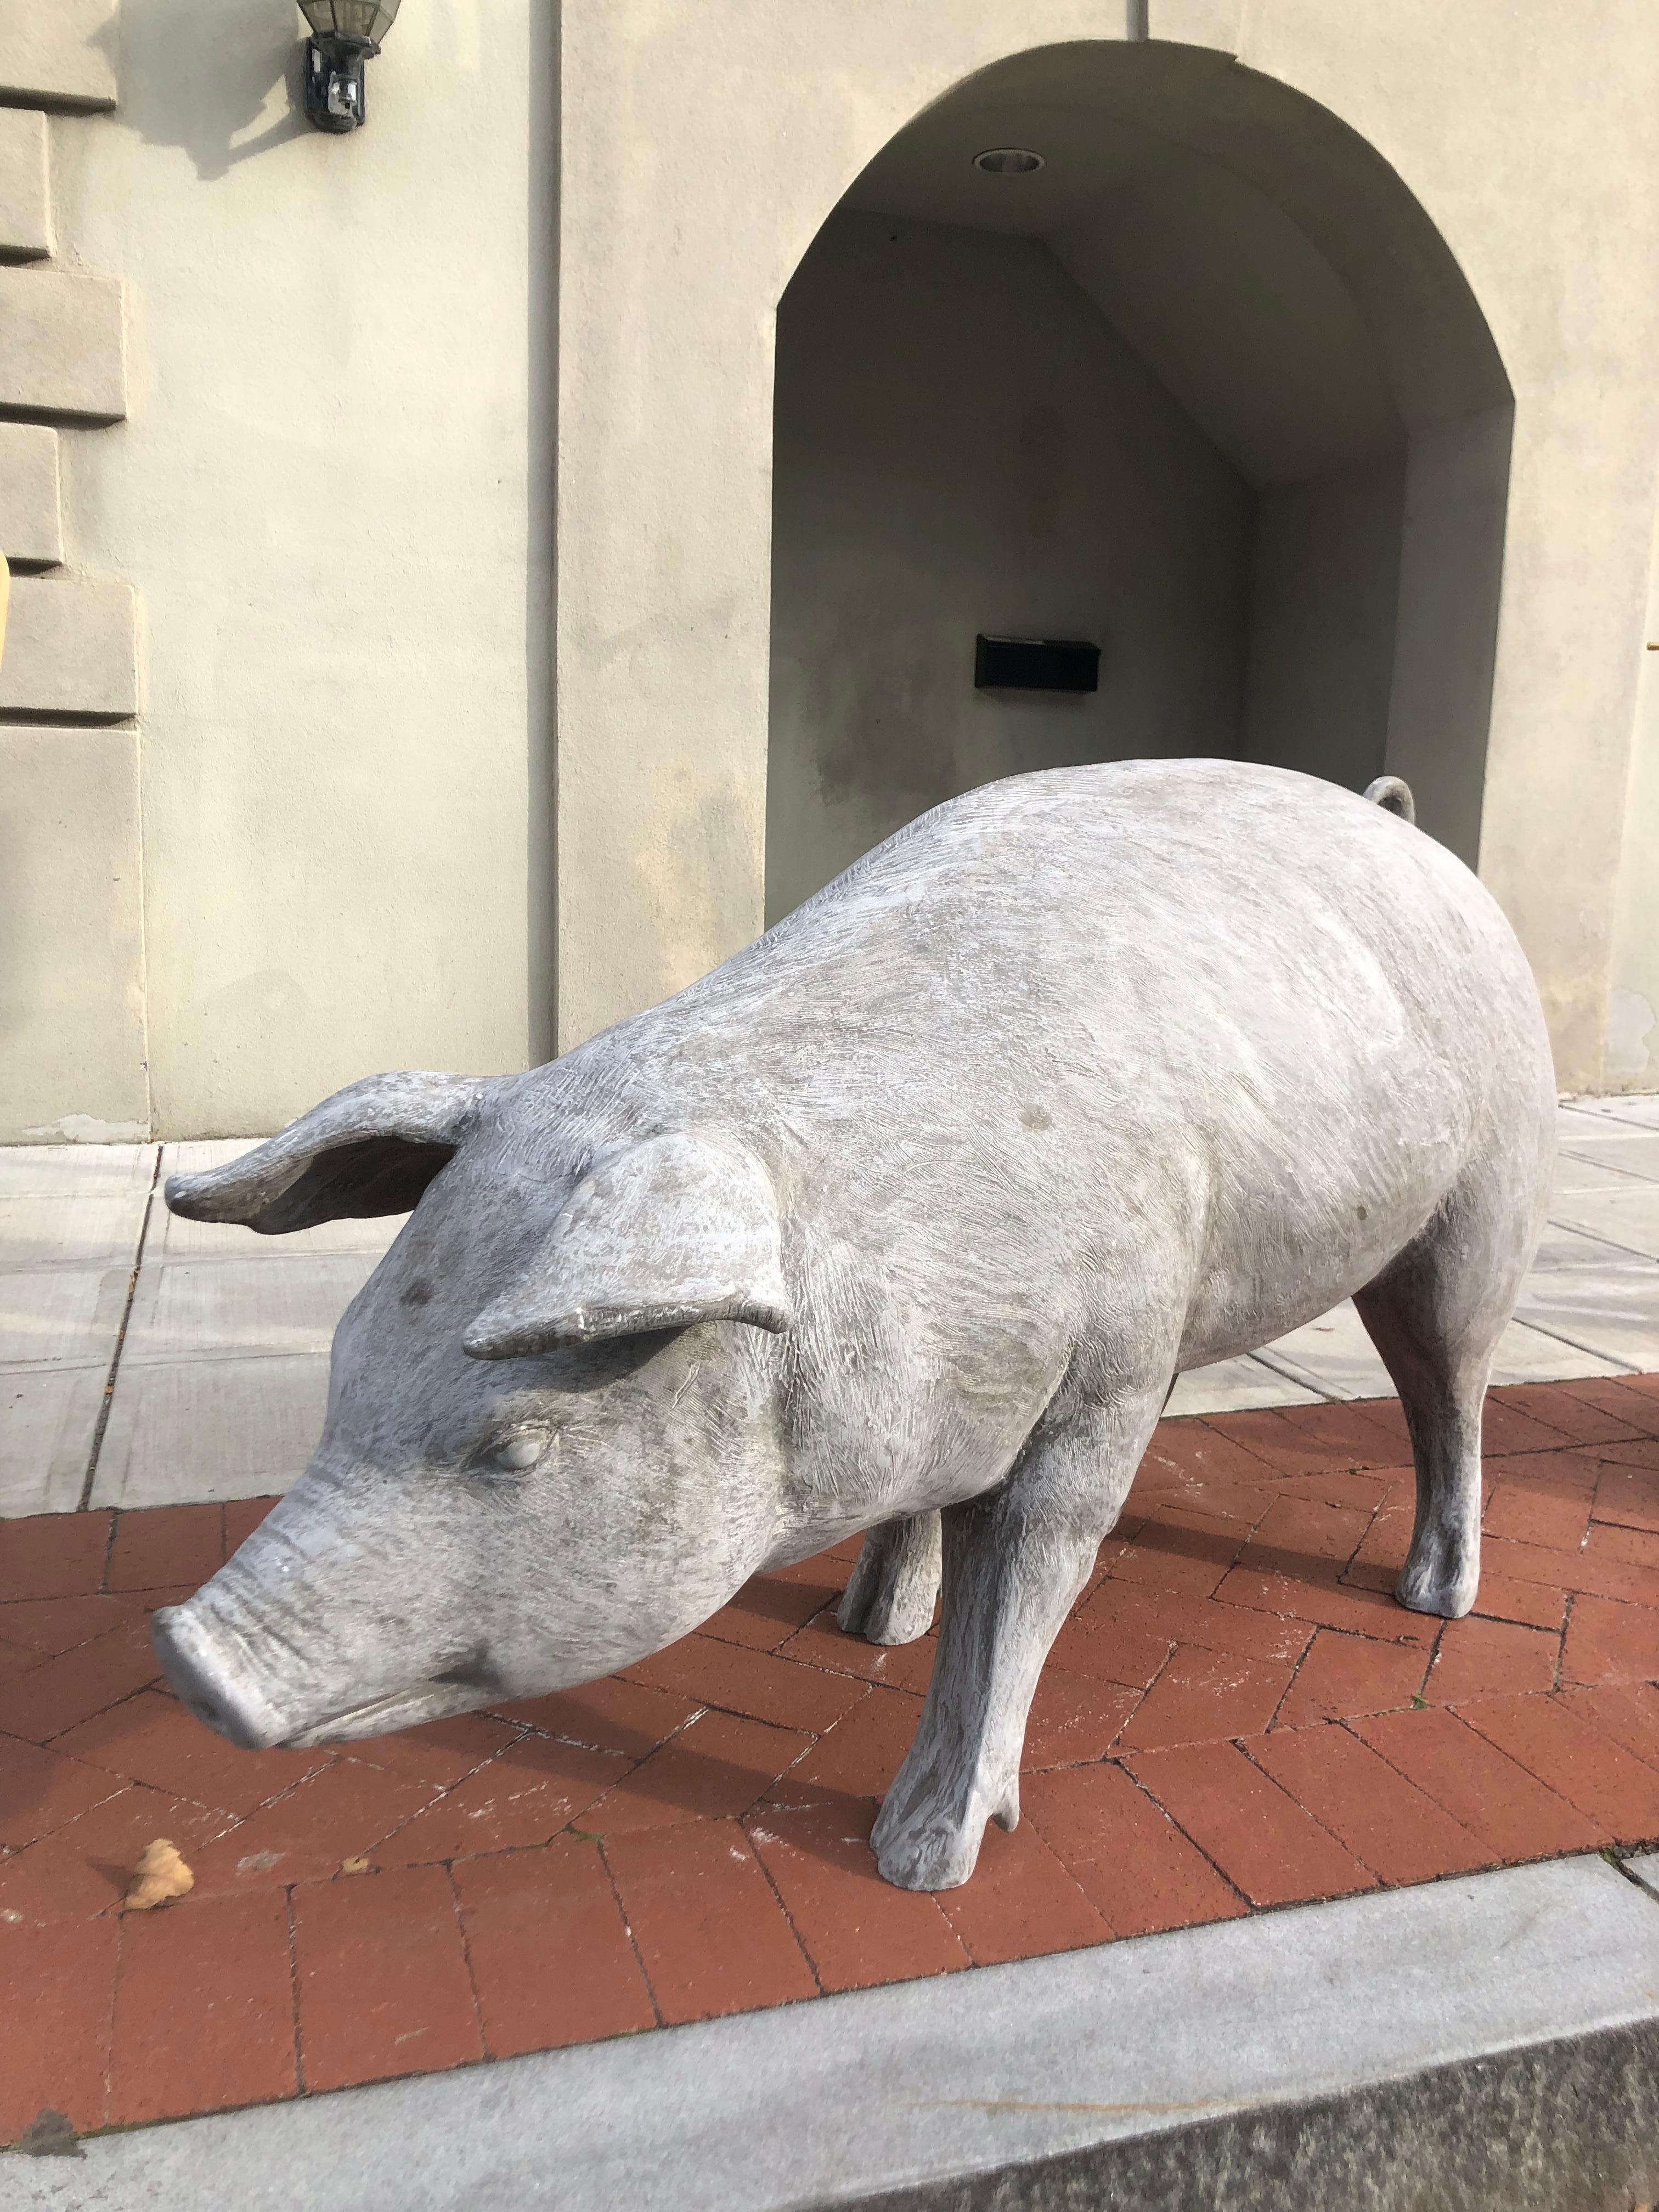 Life size fiberglass pig or hog is made of a very strong fiberglass which will withstand the elements. This Amazing pig is a perfect addition to any garden or yard. I have mine in the front yard and it looks great.